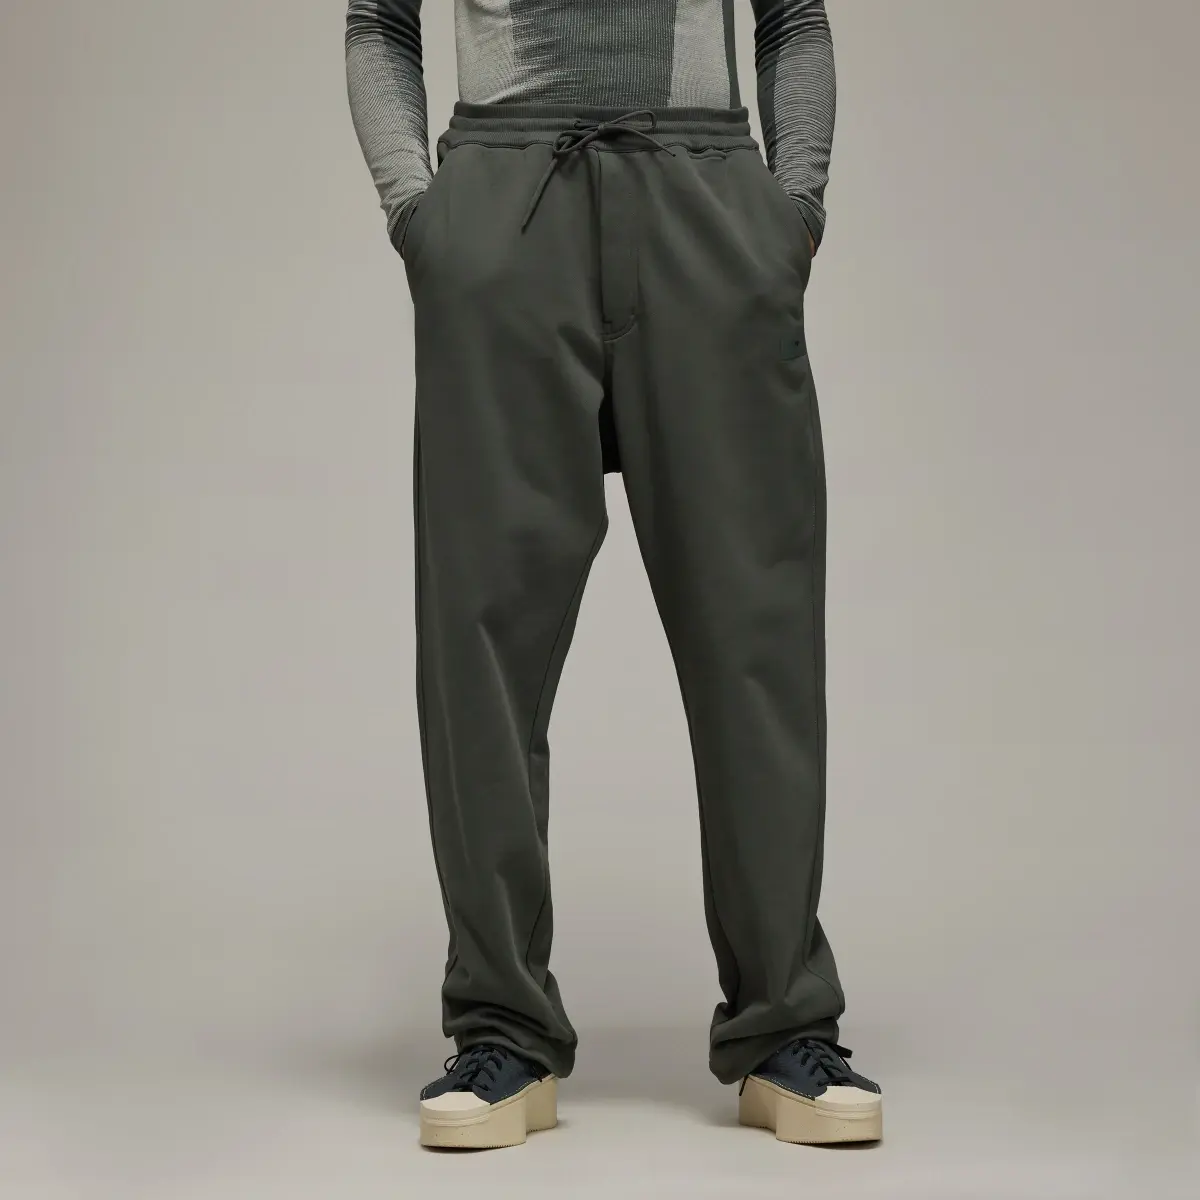 Adidas Y-3 Organic Cotton Terry Straight Joggers. 1